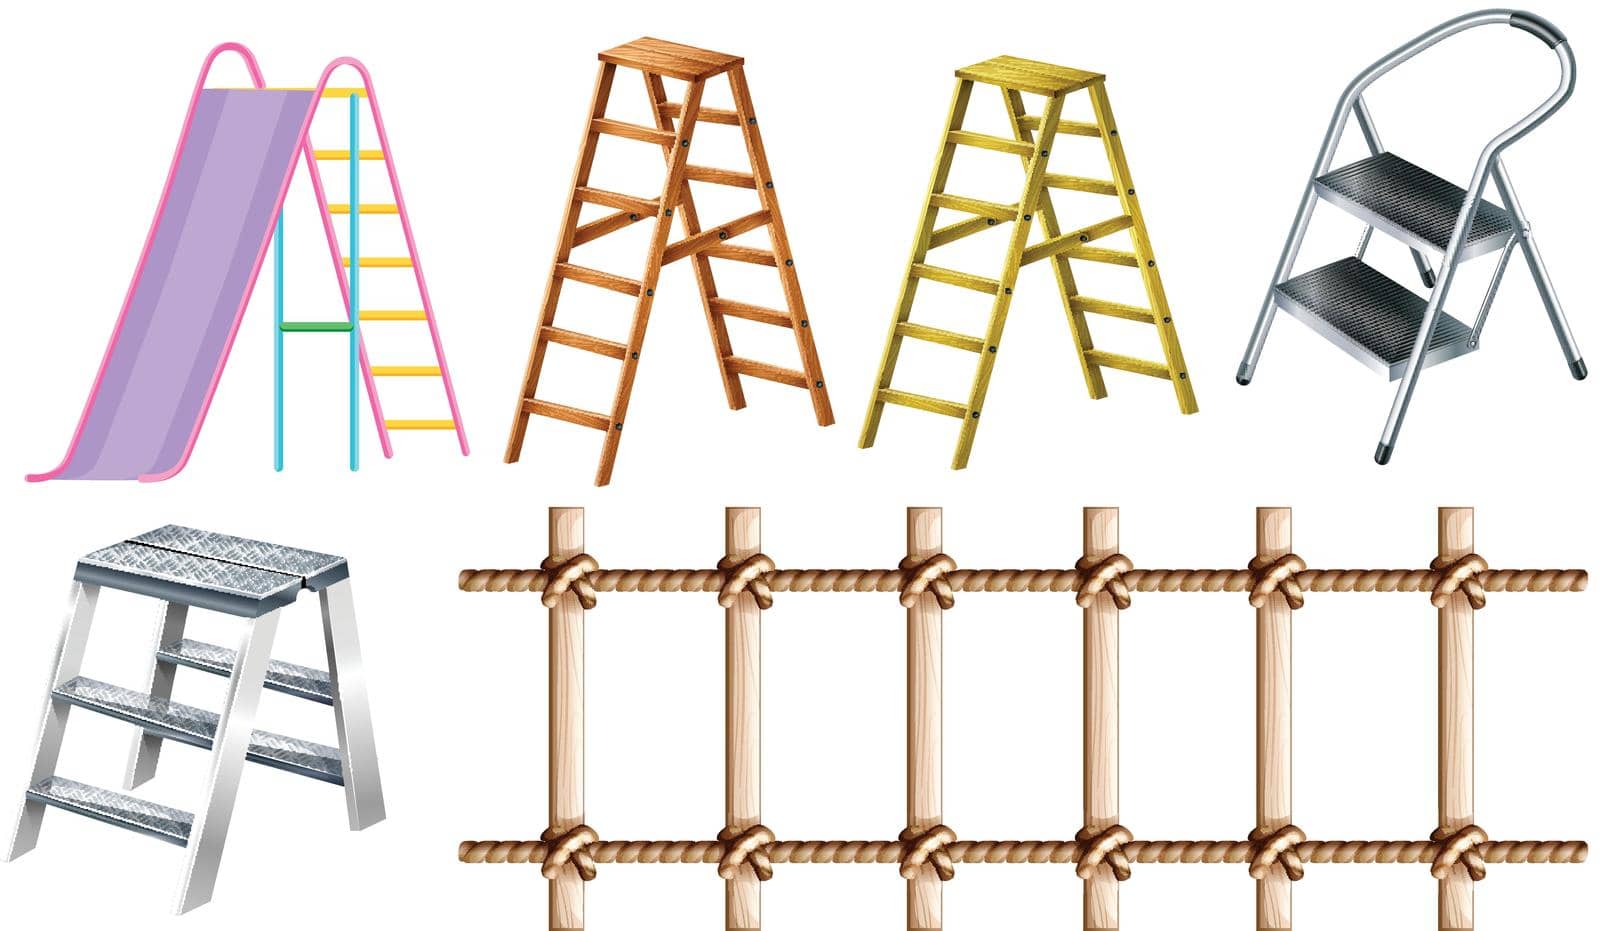 Different types of ladders by iimages